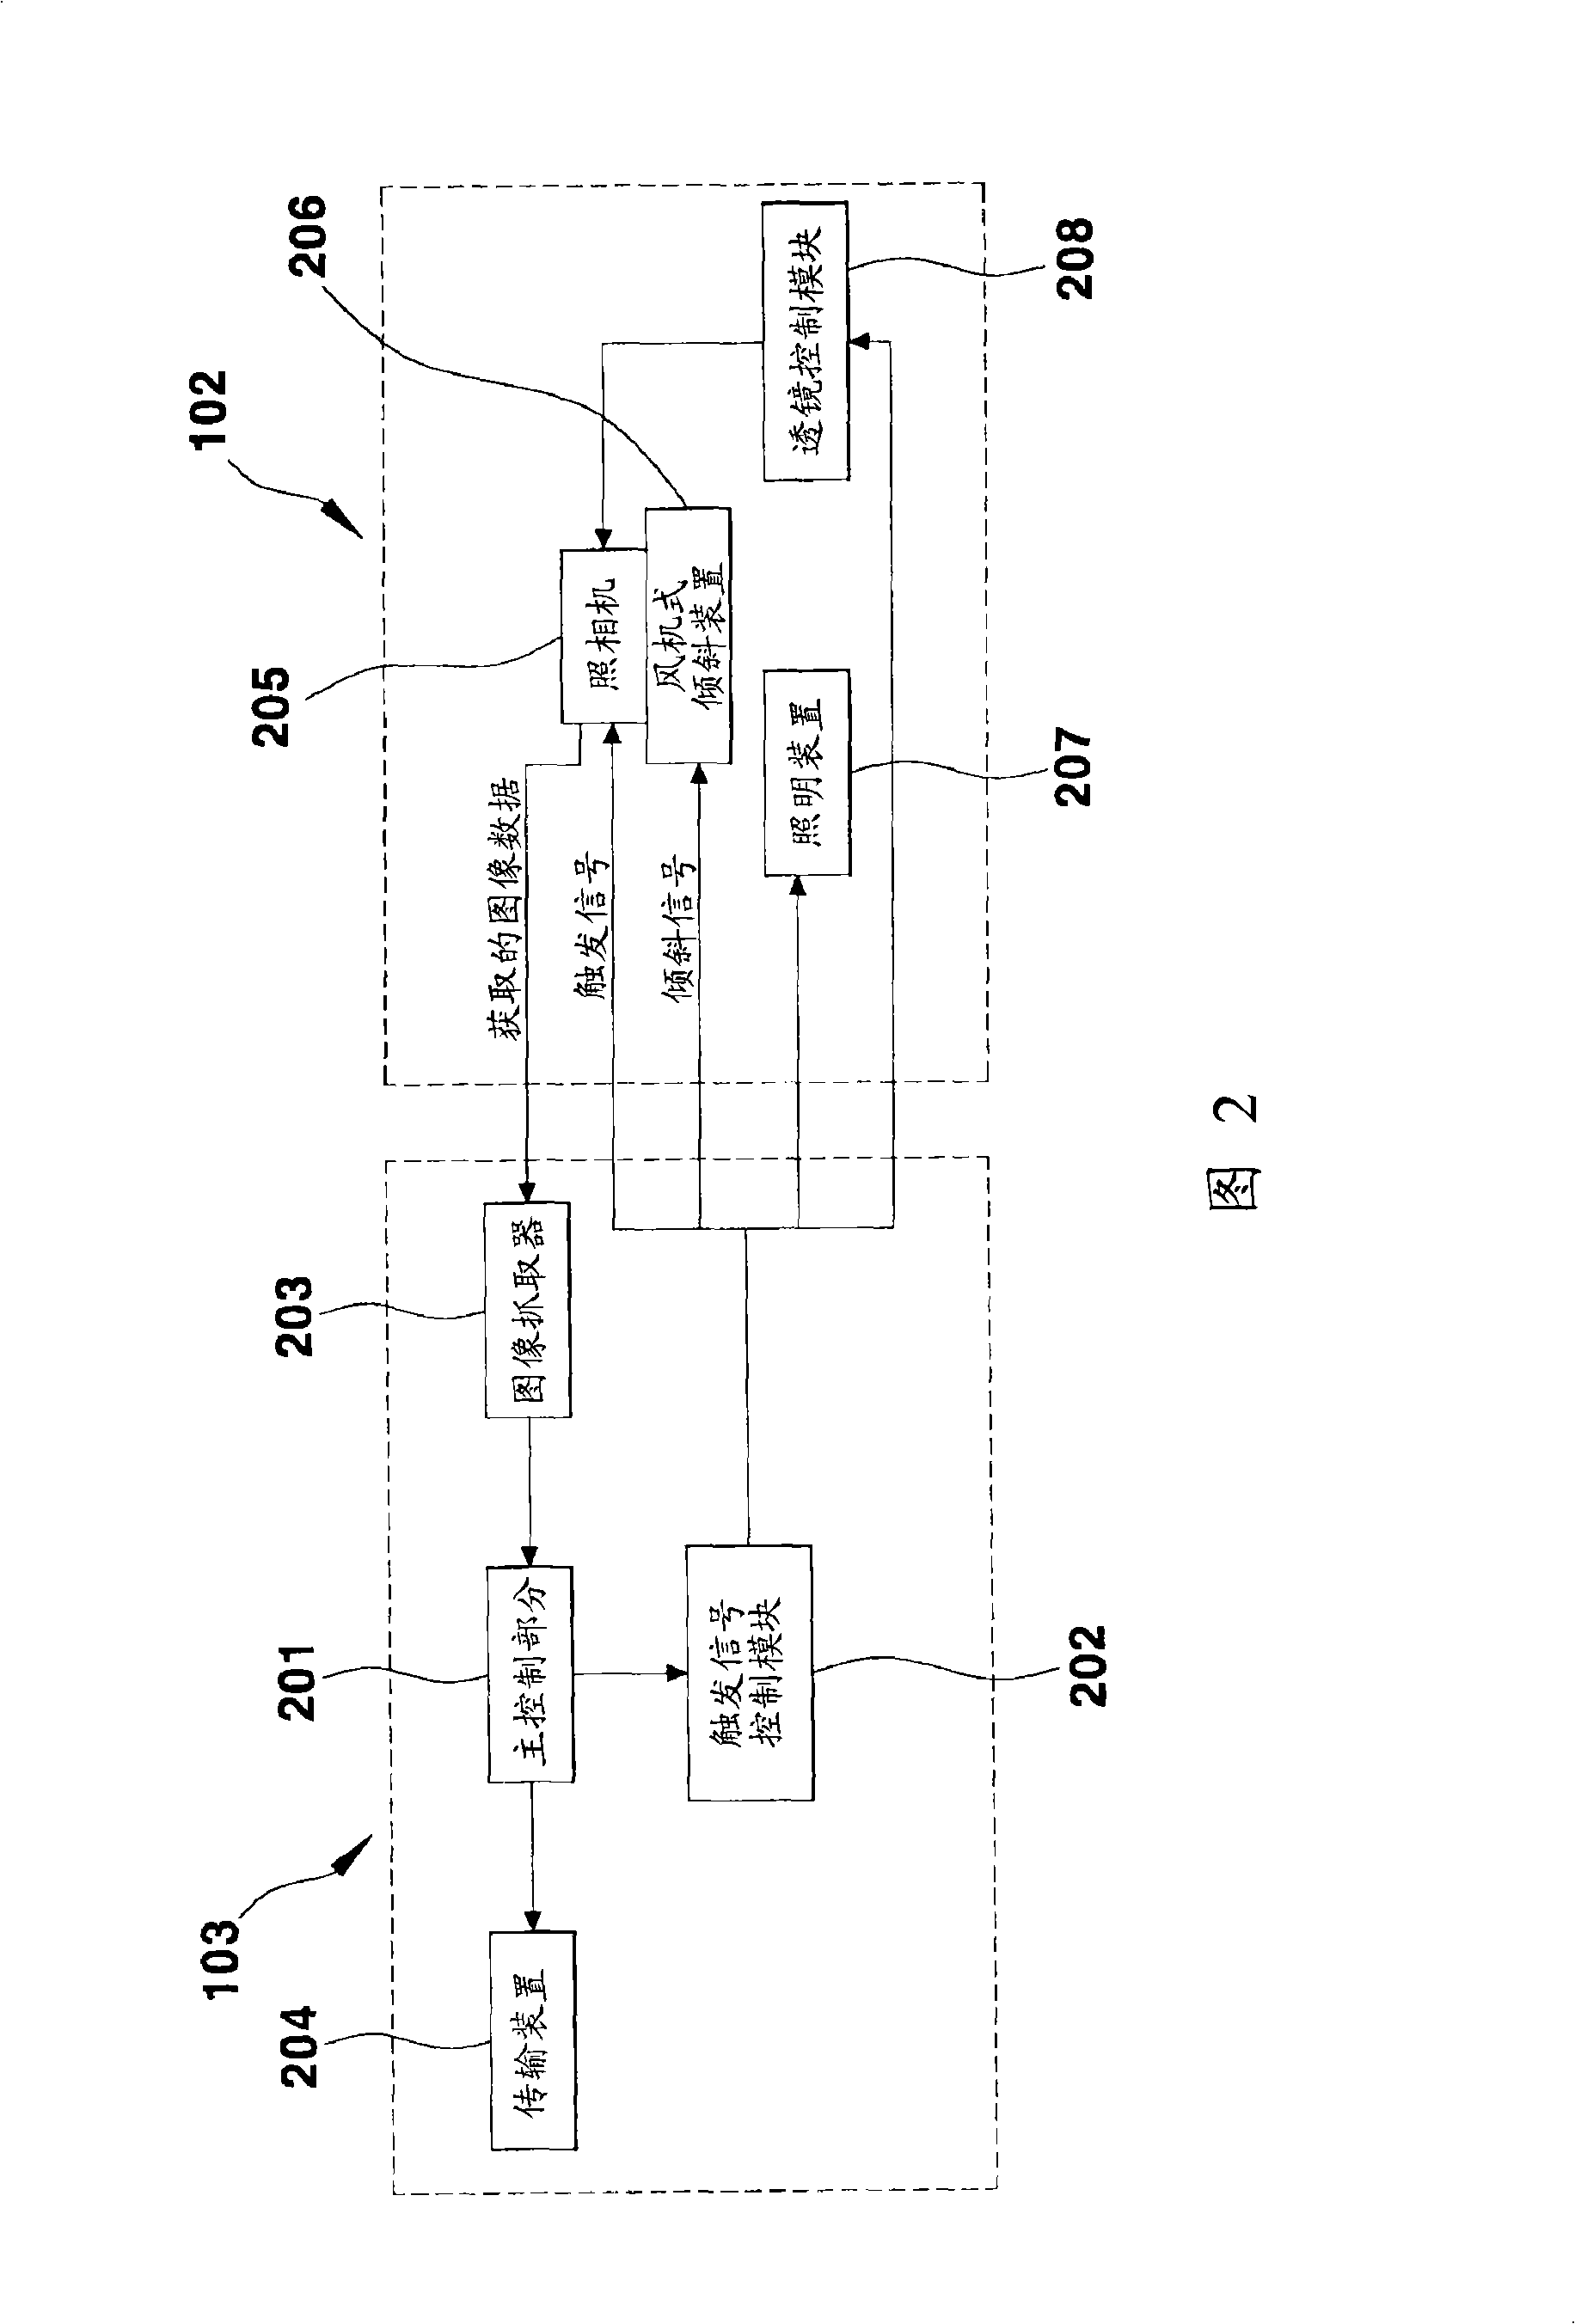 System and method for measuring liquid level by image